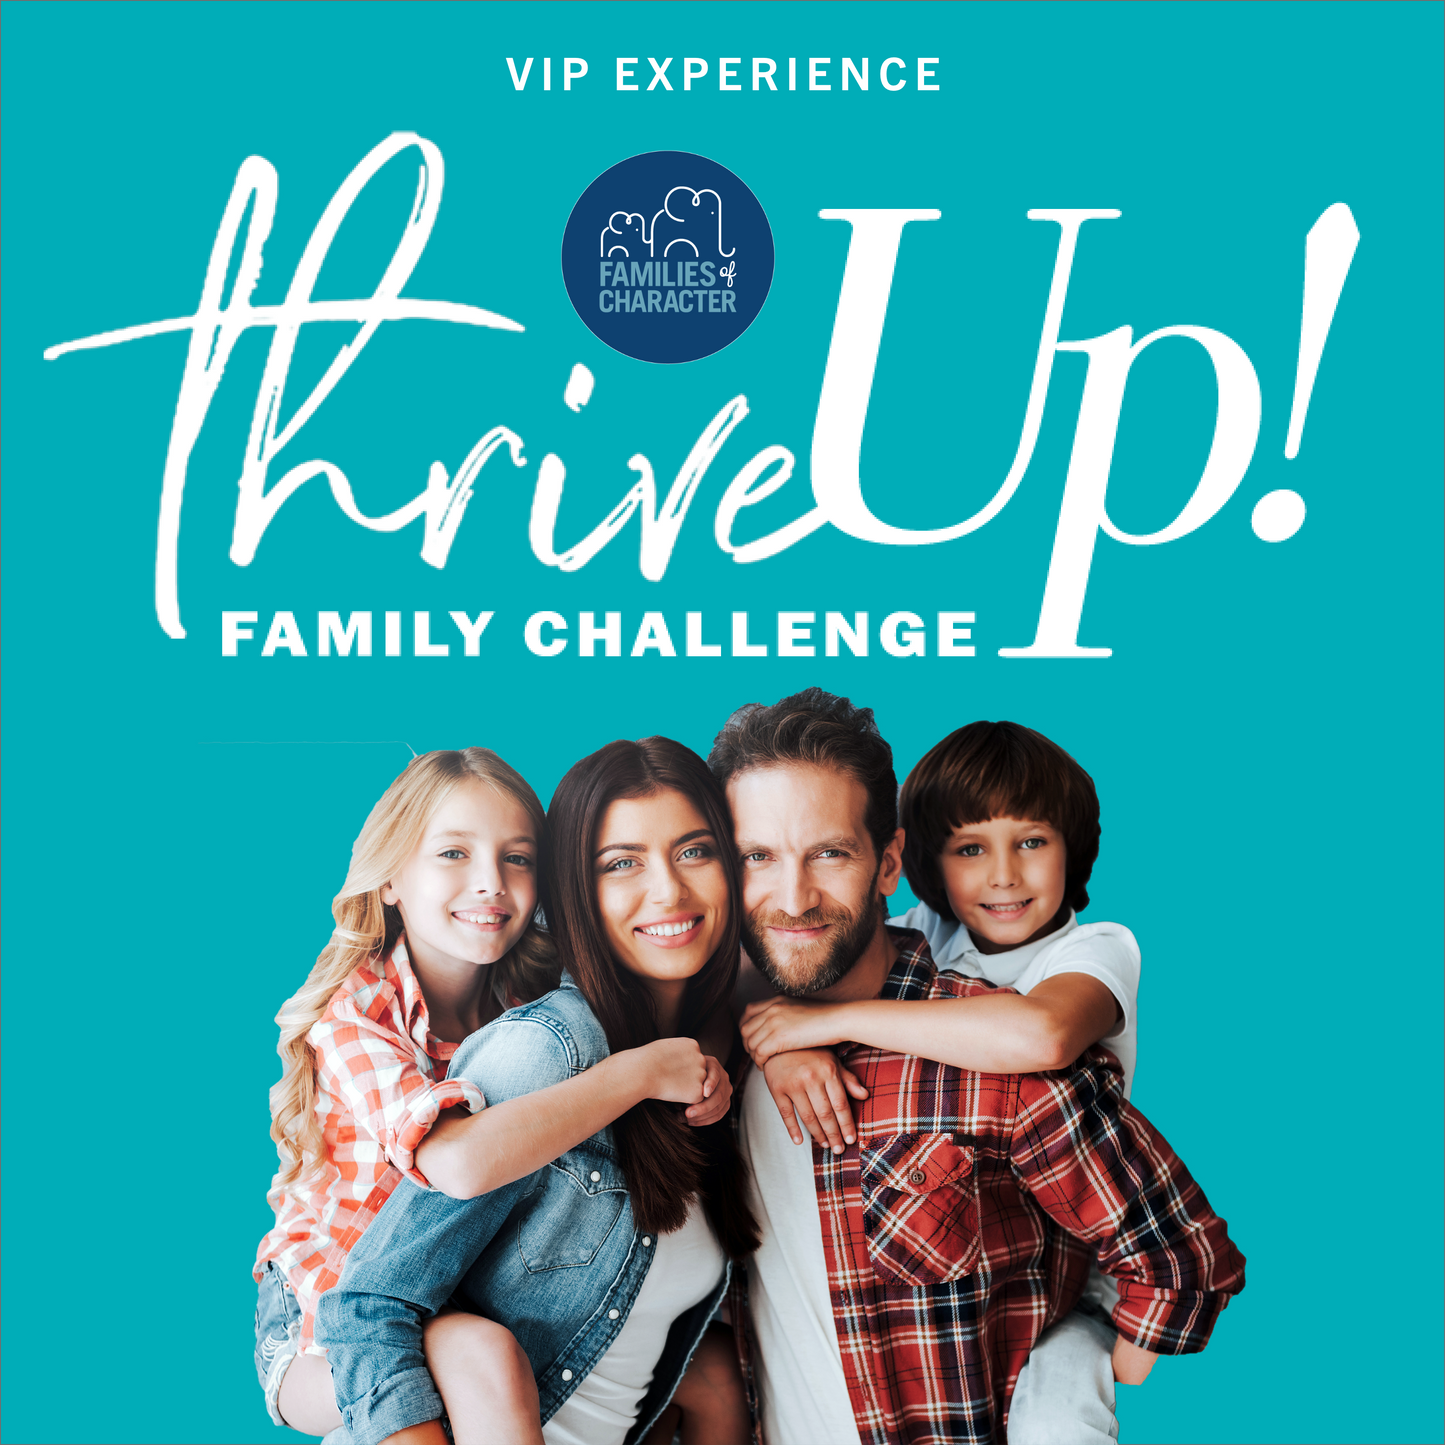 ThriveUp! Family Challenge VIP Package